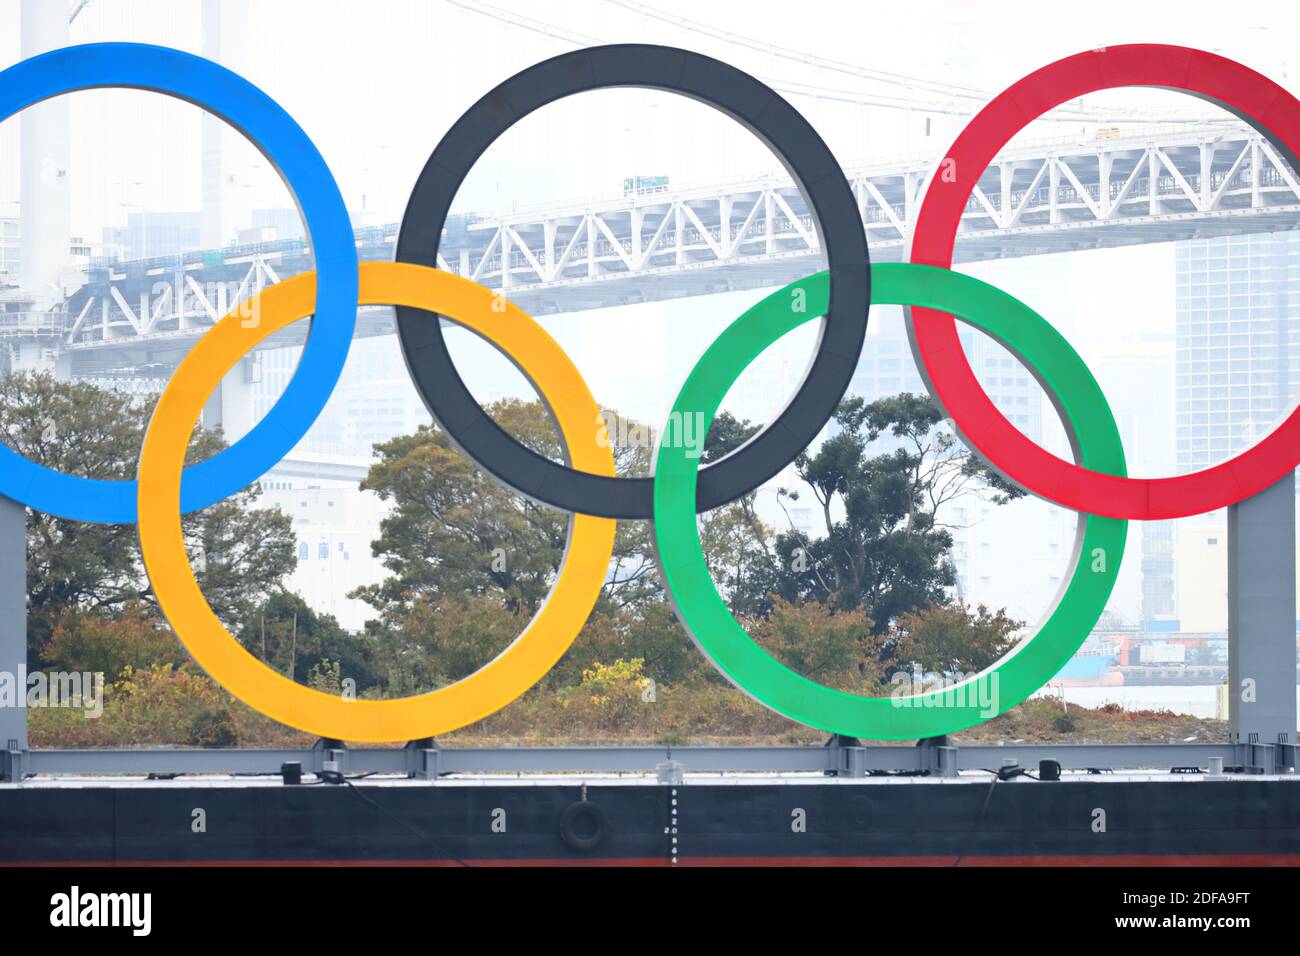 The giant Olympic rings are displayed at the Odaiba in Tokyo Japan on December 3, 2020. The Olympic Symbol was reinstalled after maintenance ahead of the postponed Tokyo 2020 Olympic Games. Credit: Naoki Nishimura/AFLO SPORT/Alamy Live News Stock Photo